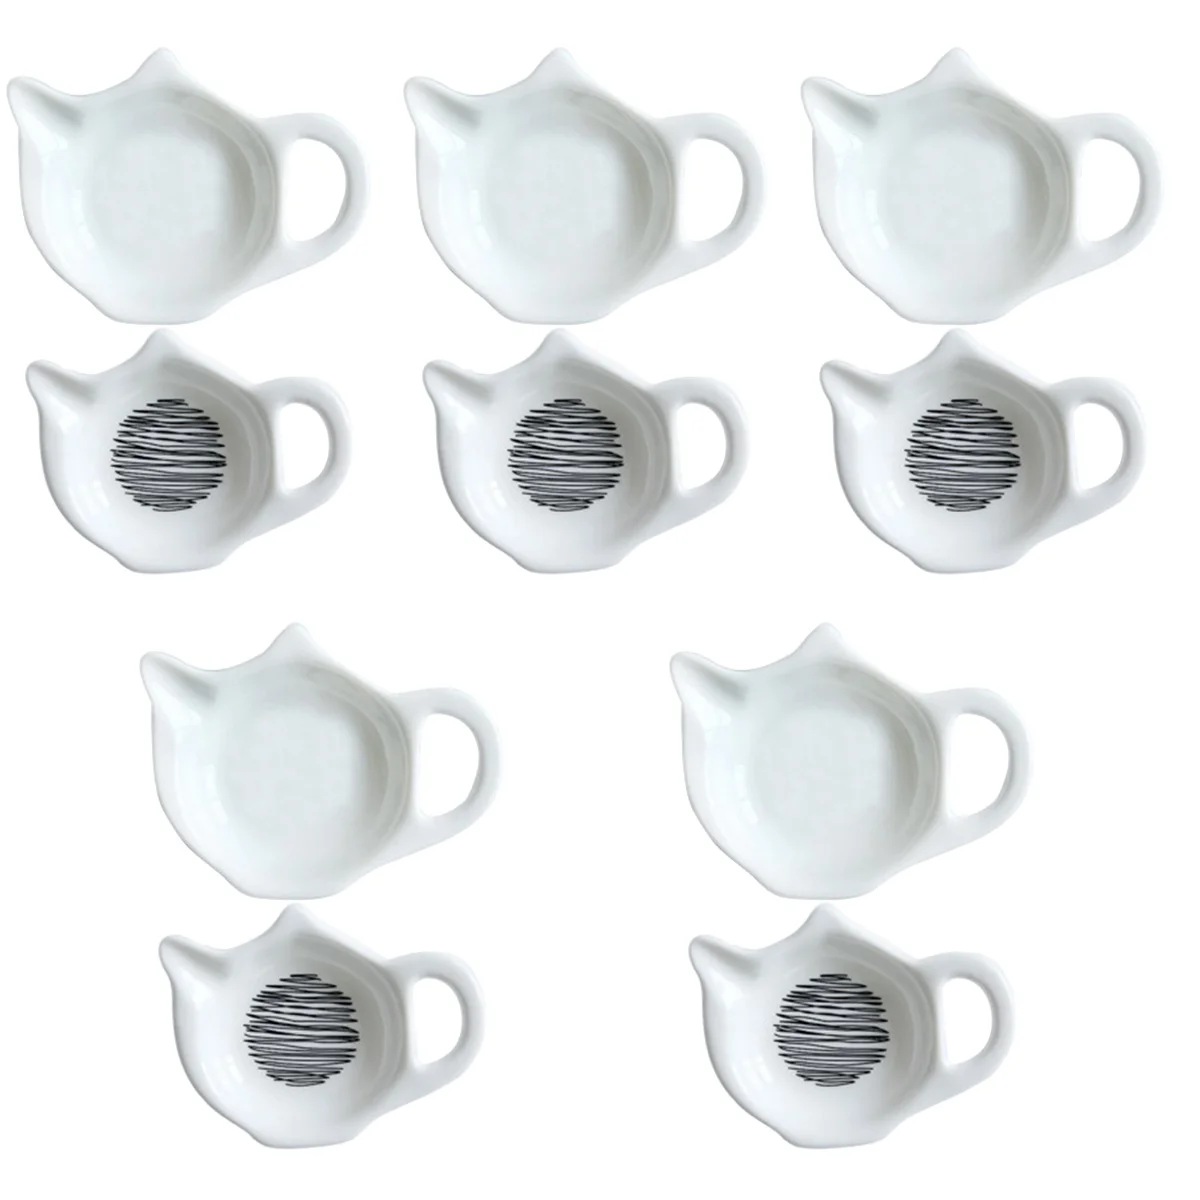 

10 Pcs Special Coffee Spoon Rest Teabag Dishes Household Teabag Holder for Replace Coffee Station Kitchen Home